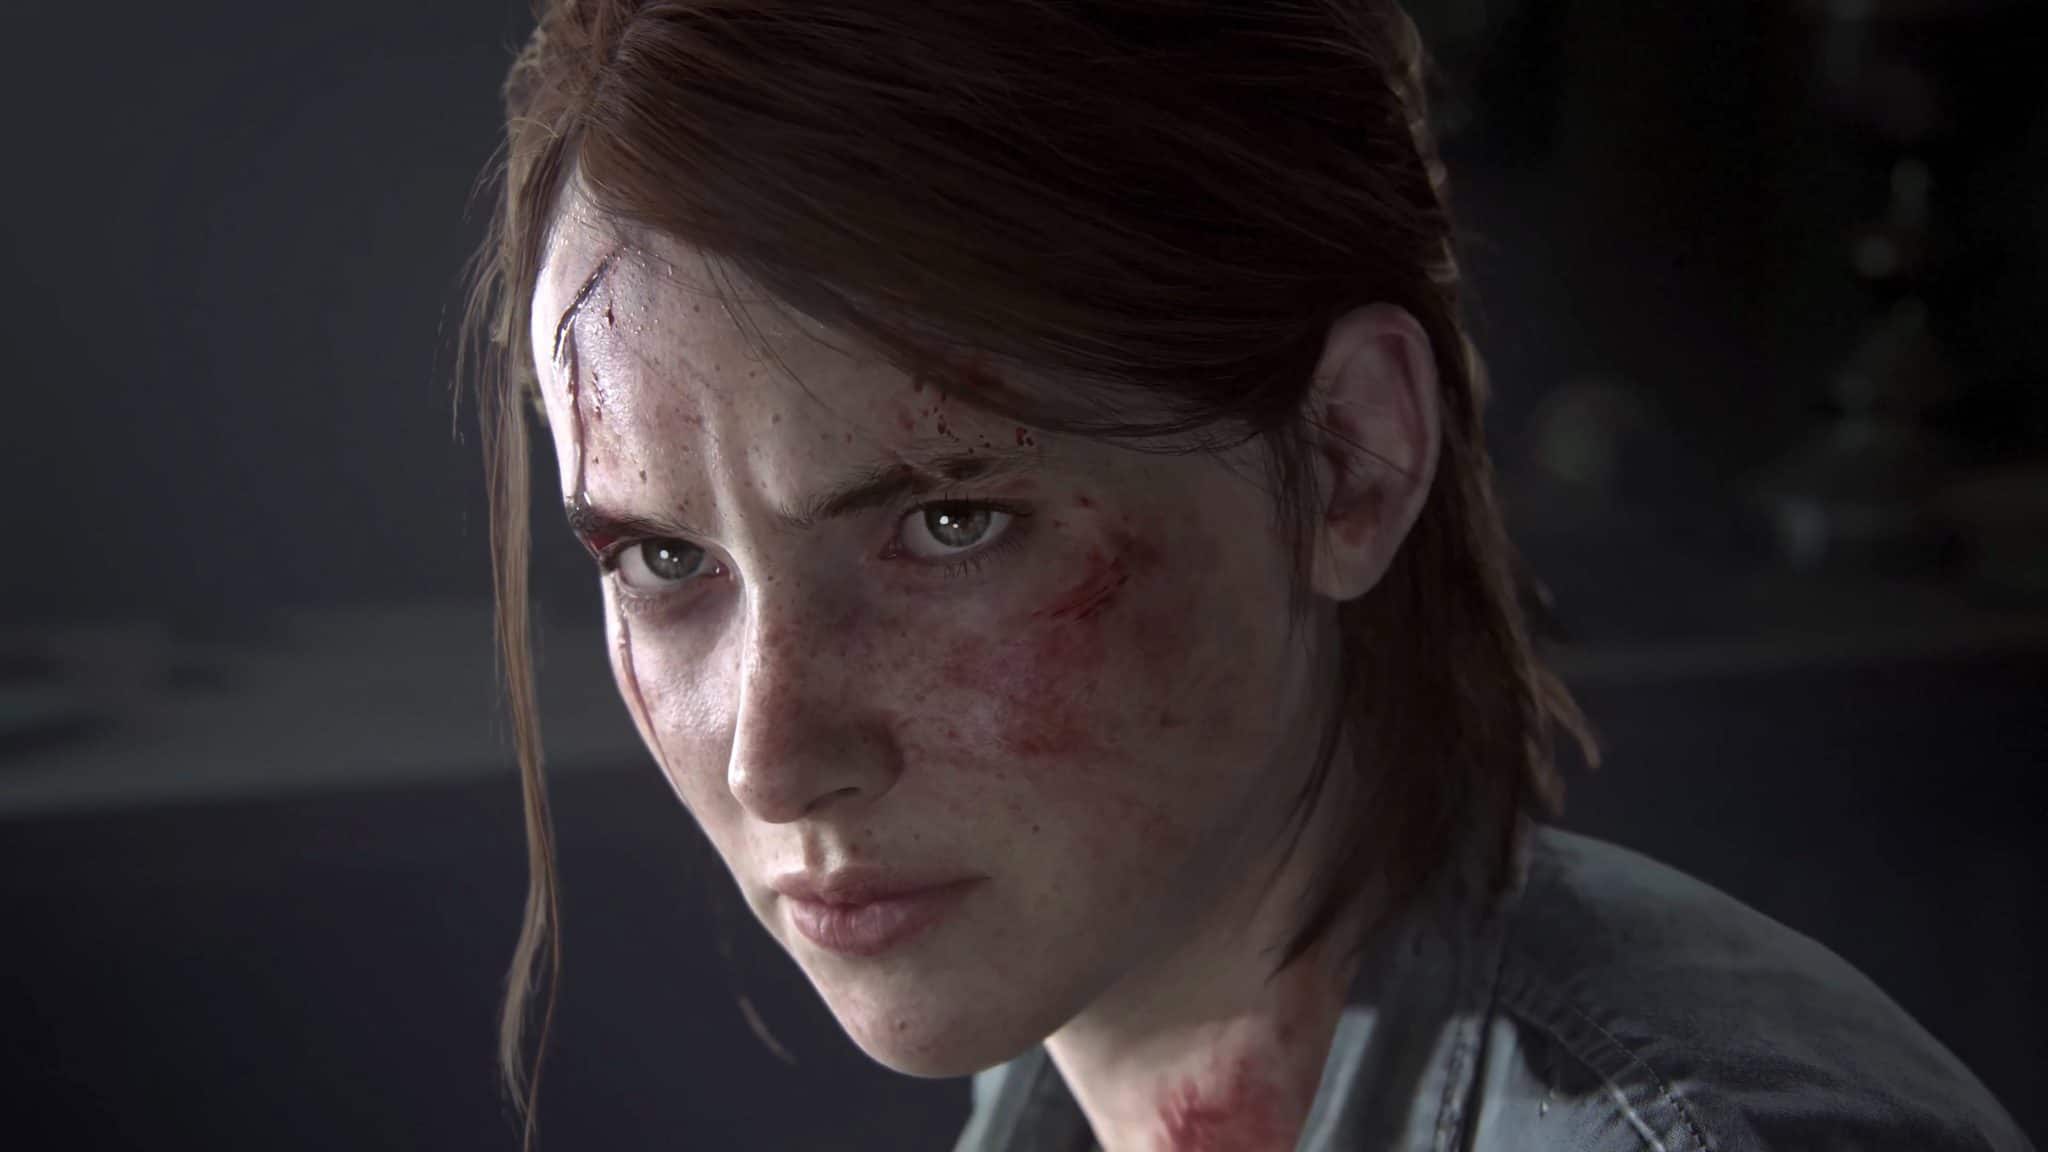 download ellie the last of us 2 for free